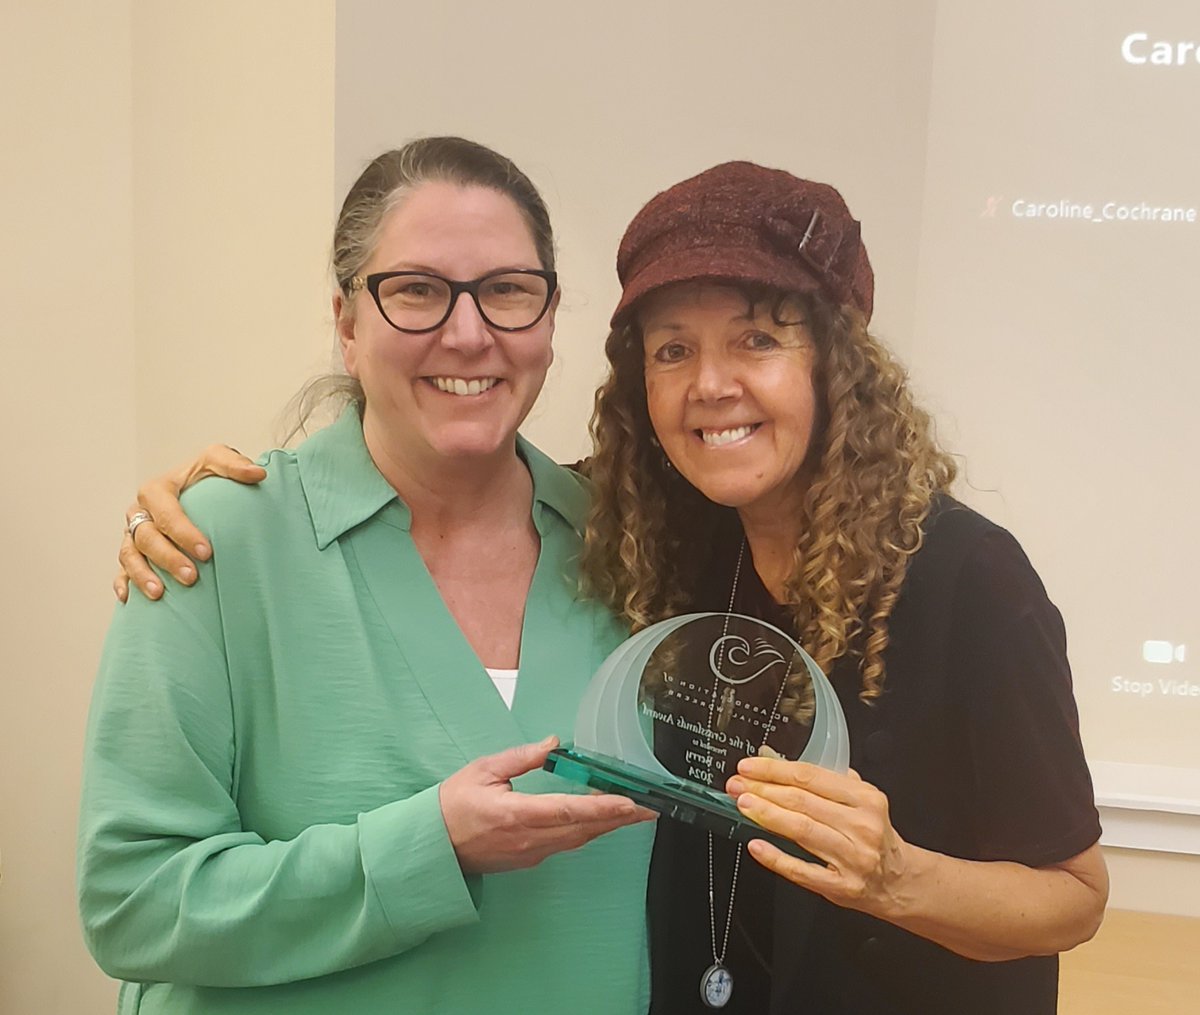 Thompson Nicola Branch Chair @1AustinLA presented #RunClub founder and #socialworker Jo Berry with the Heart of the Grasslands Award for Distinguished Service in #Kamloops today. Congrats Jo! An amazing @thompsonriversu #socialwork grad!